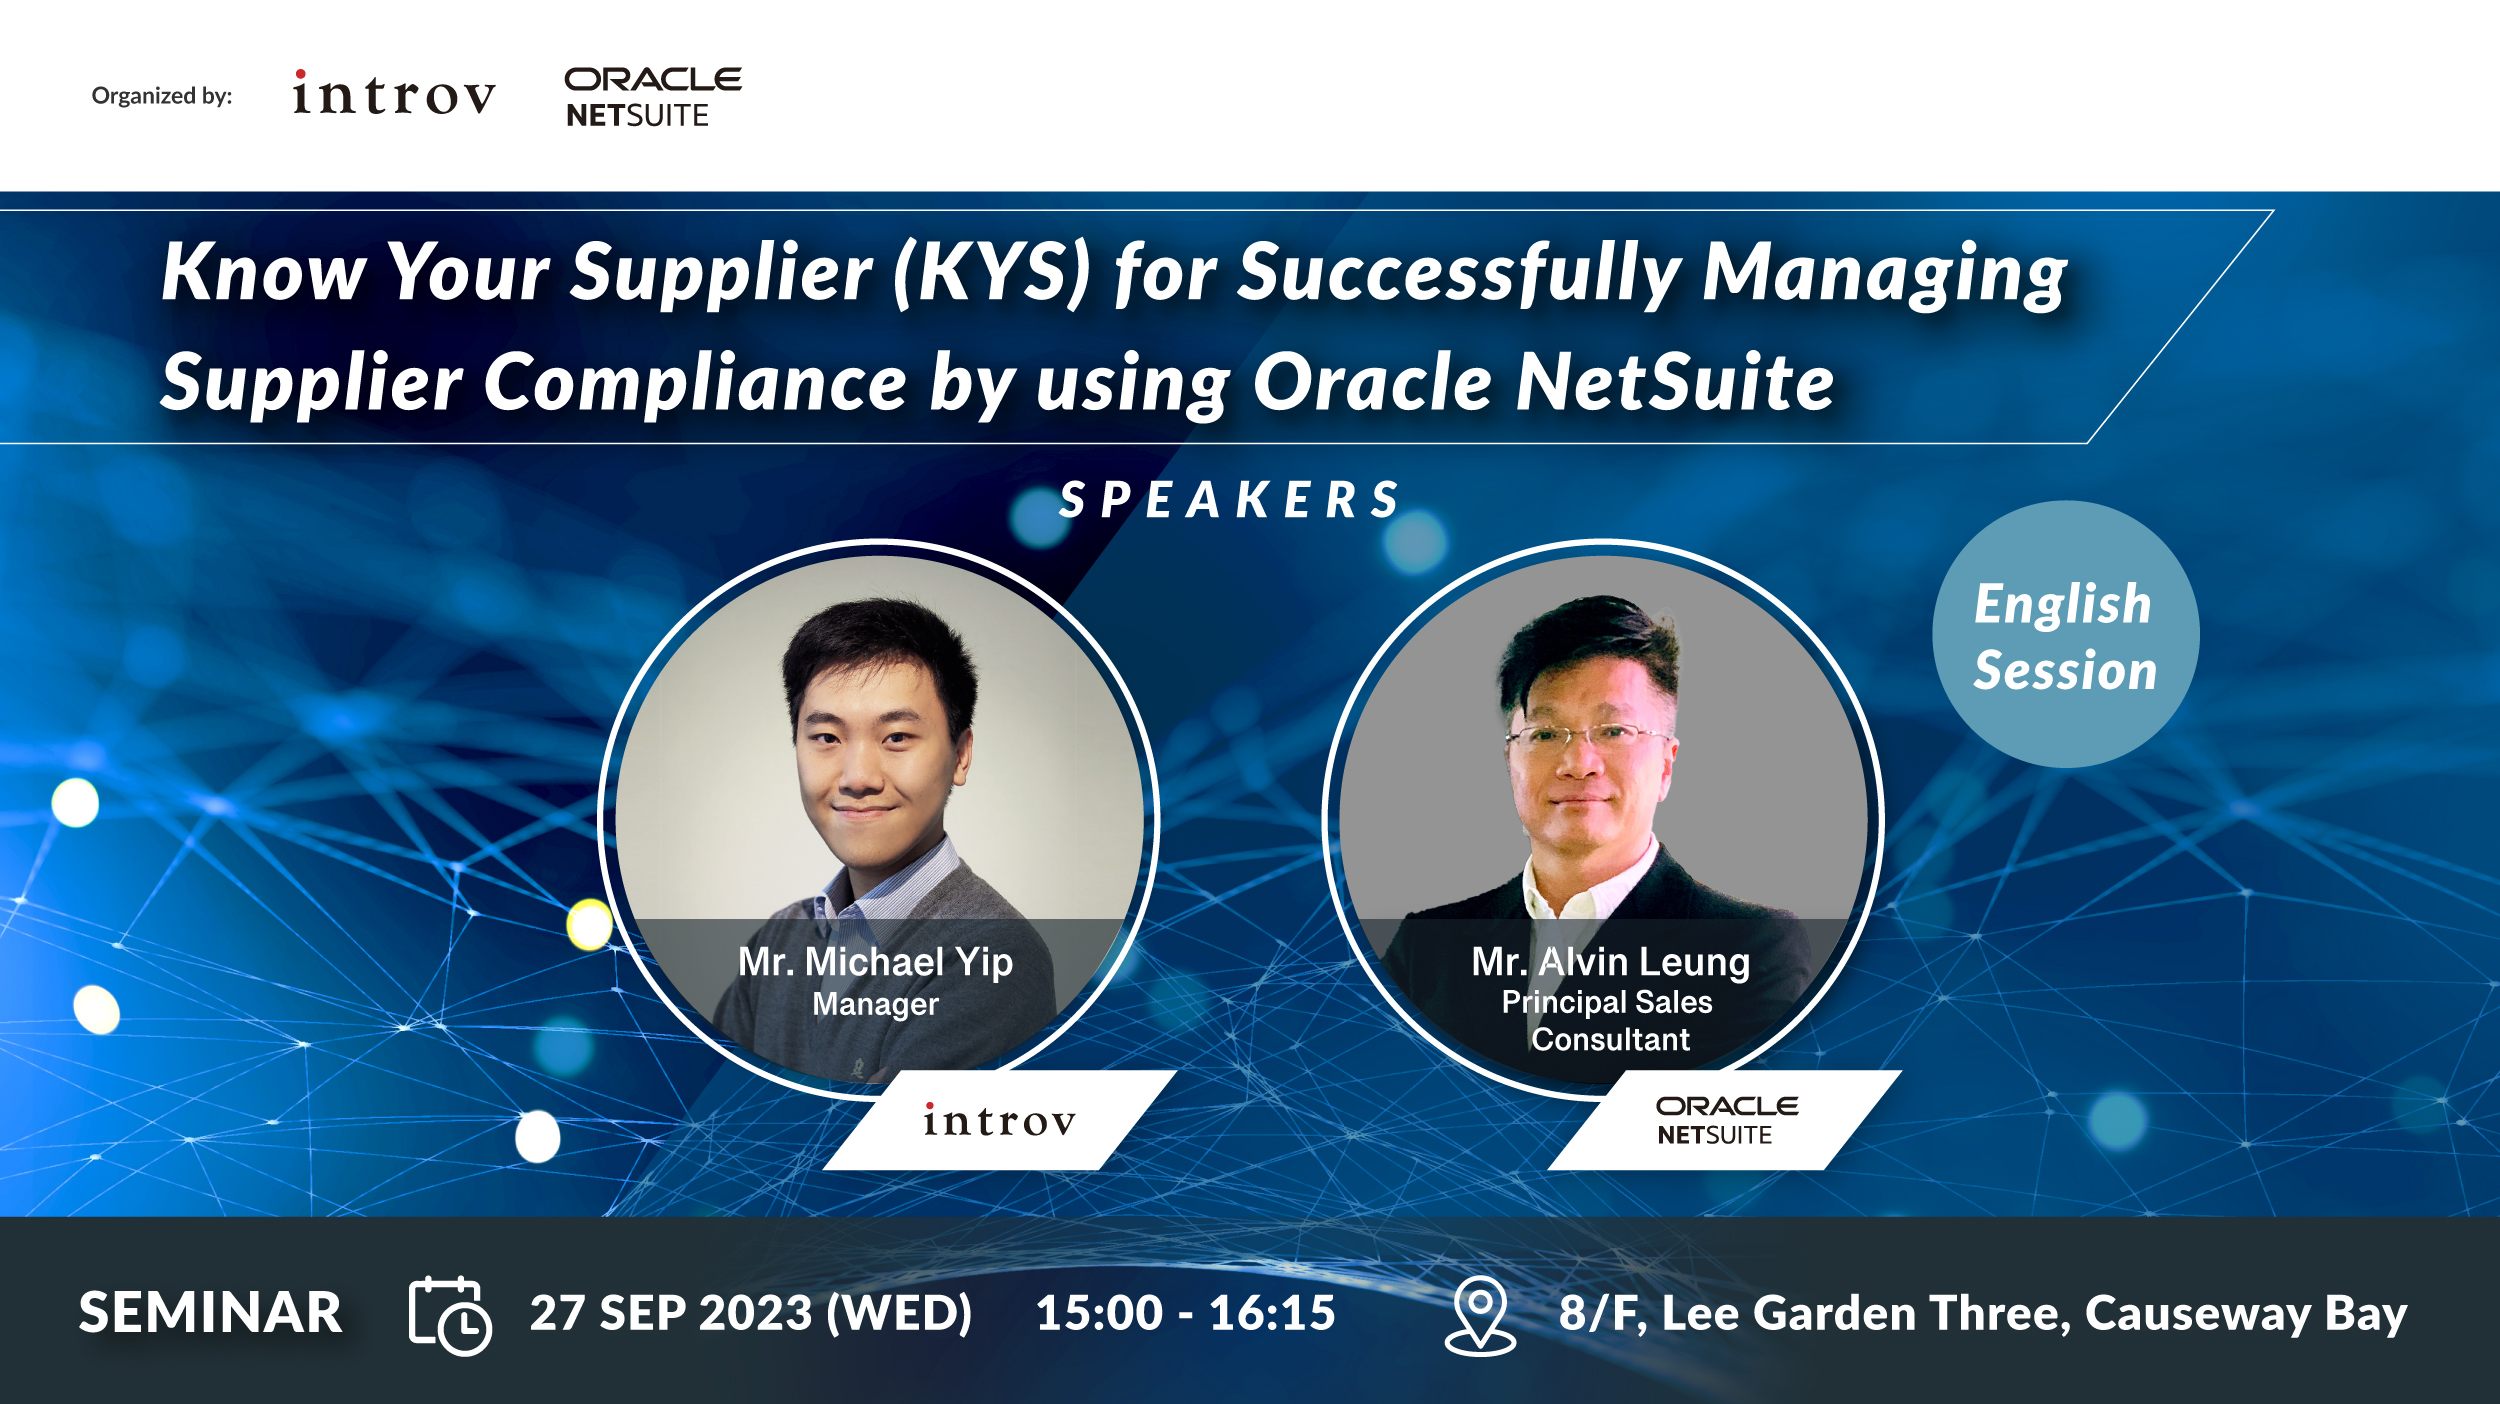 English Session Seminar: Know Your Supplier (KYS) for Successfully Managing Supplier Compliance by using Oracle NetSuite (27 Sep 2023)